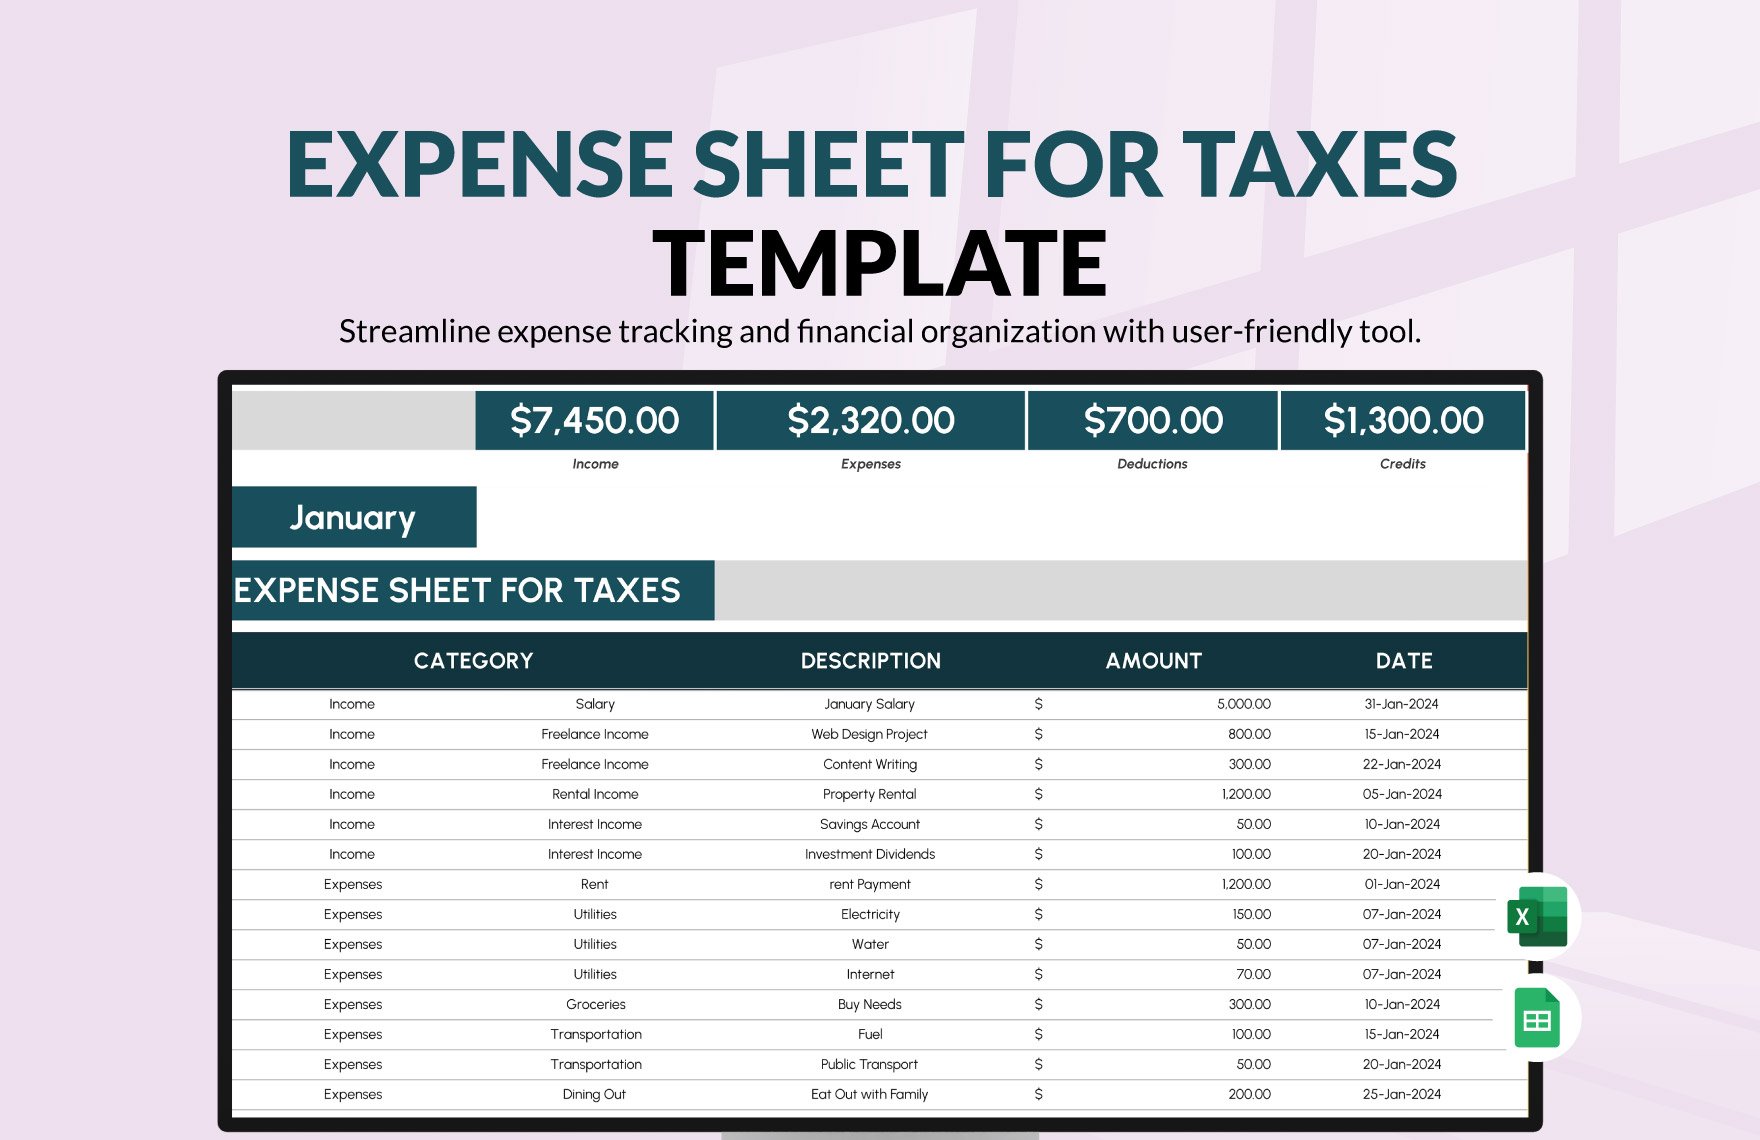 Expense Sheet for Taxes Template in Excel, Google Sheets